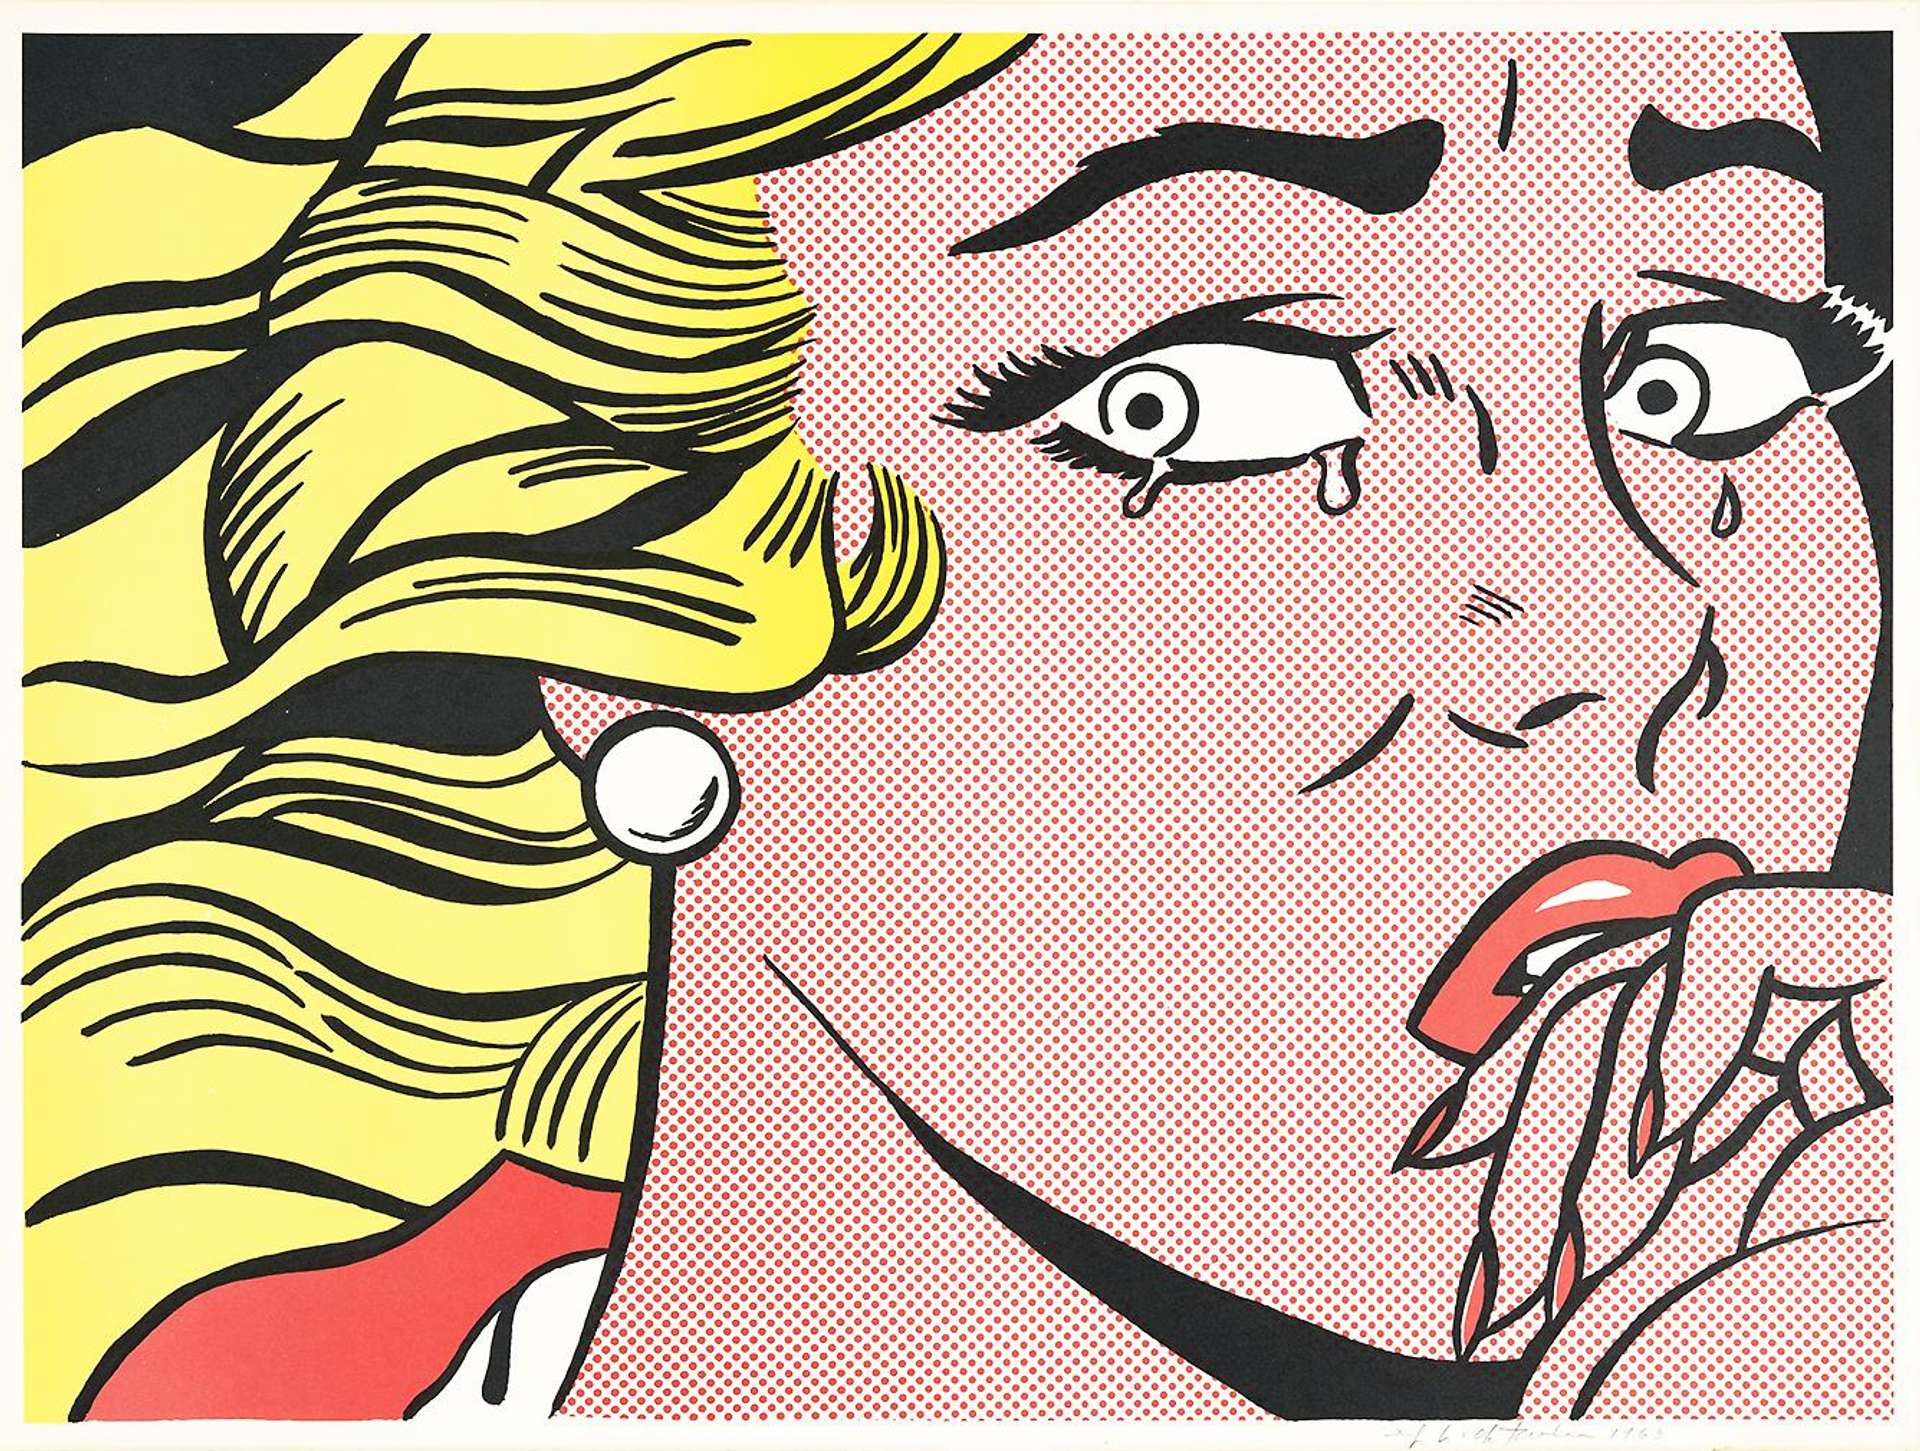 An image of a print by Roy Lichtenstein, showing a blonde woman with red lipstick and a pearl earring. Tears fall from her eyes.